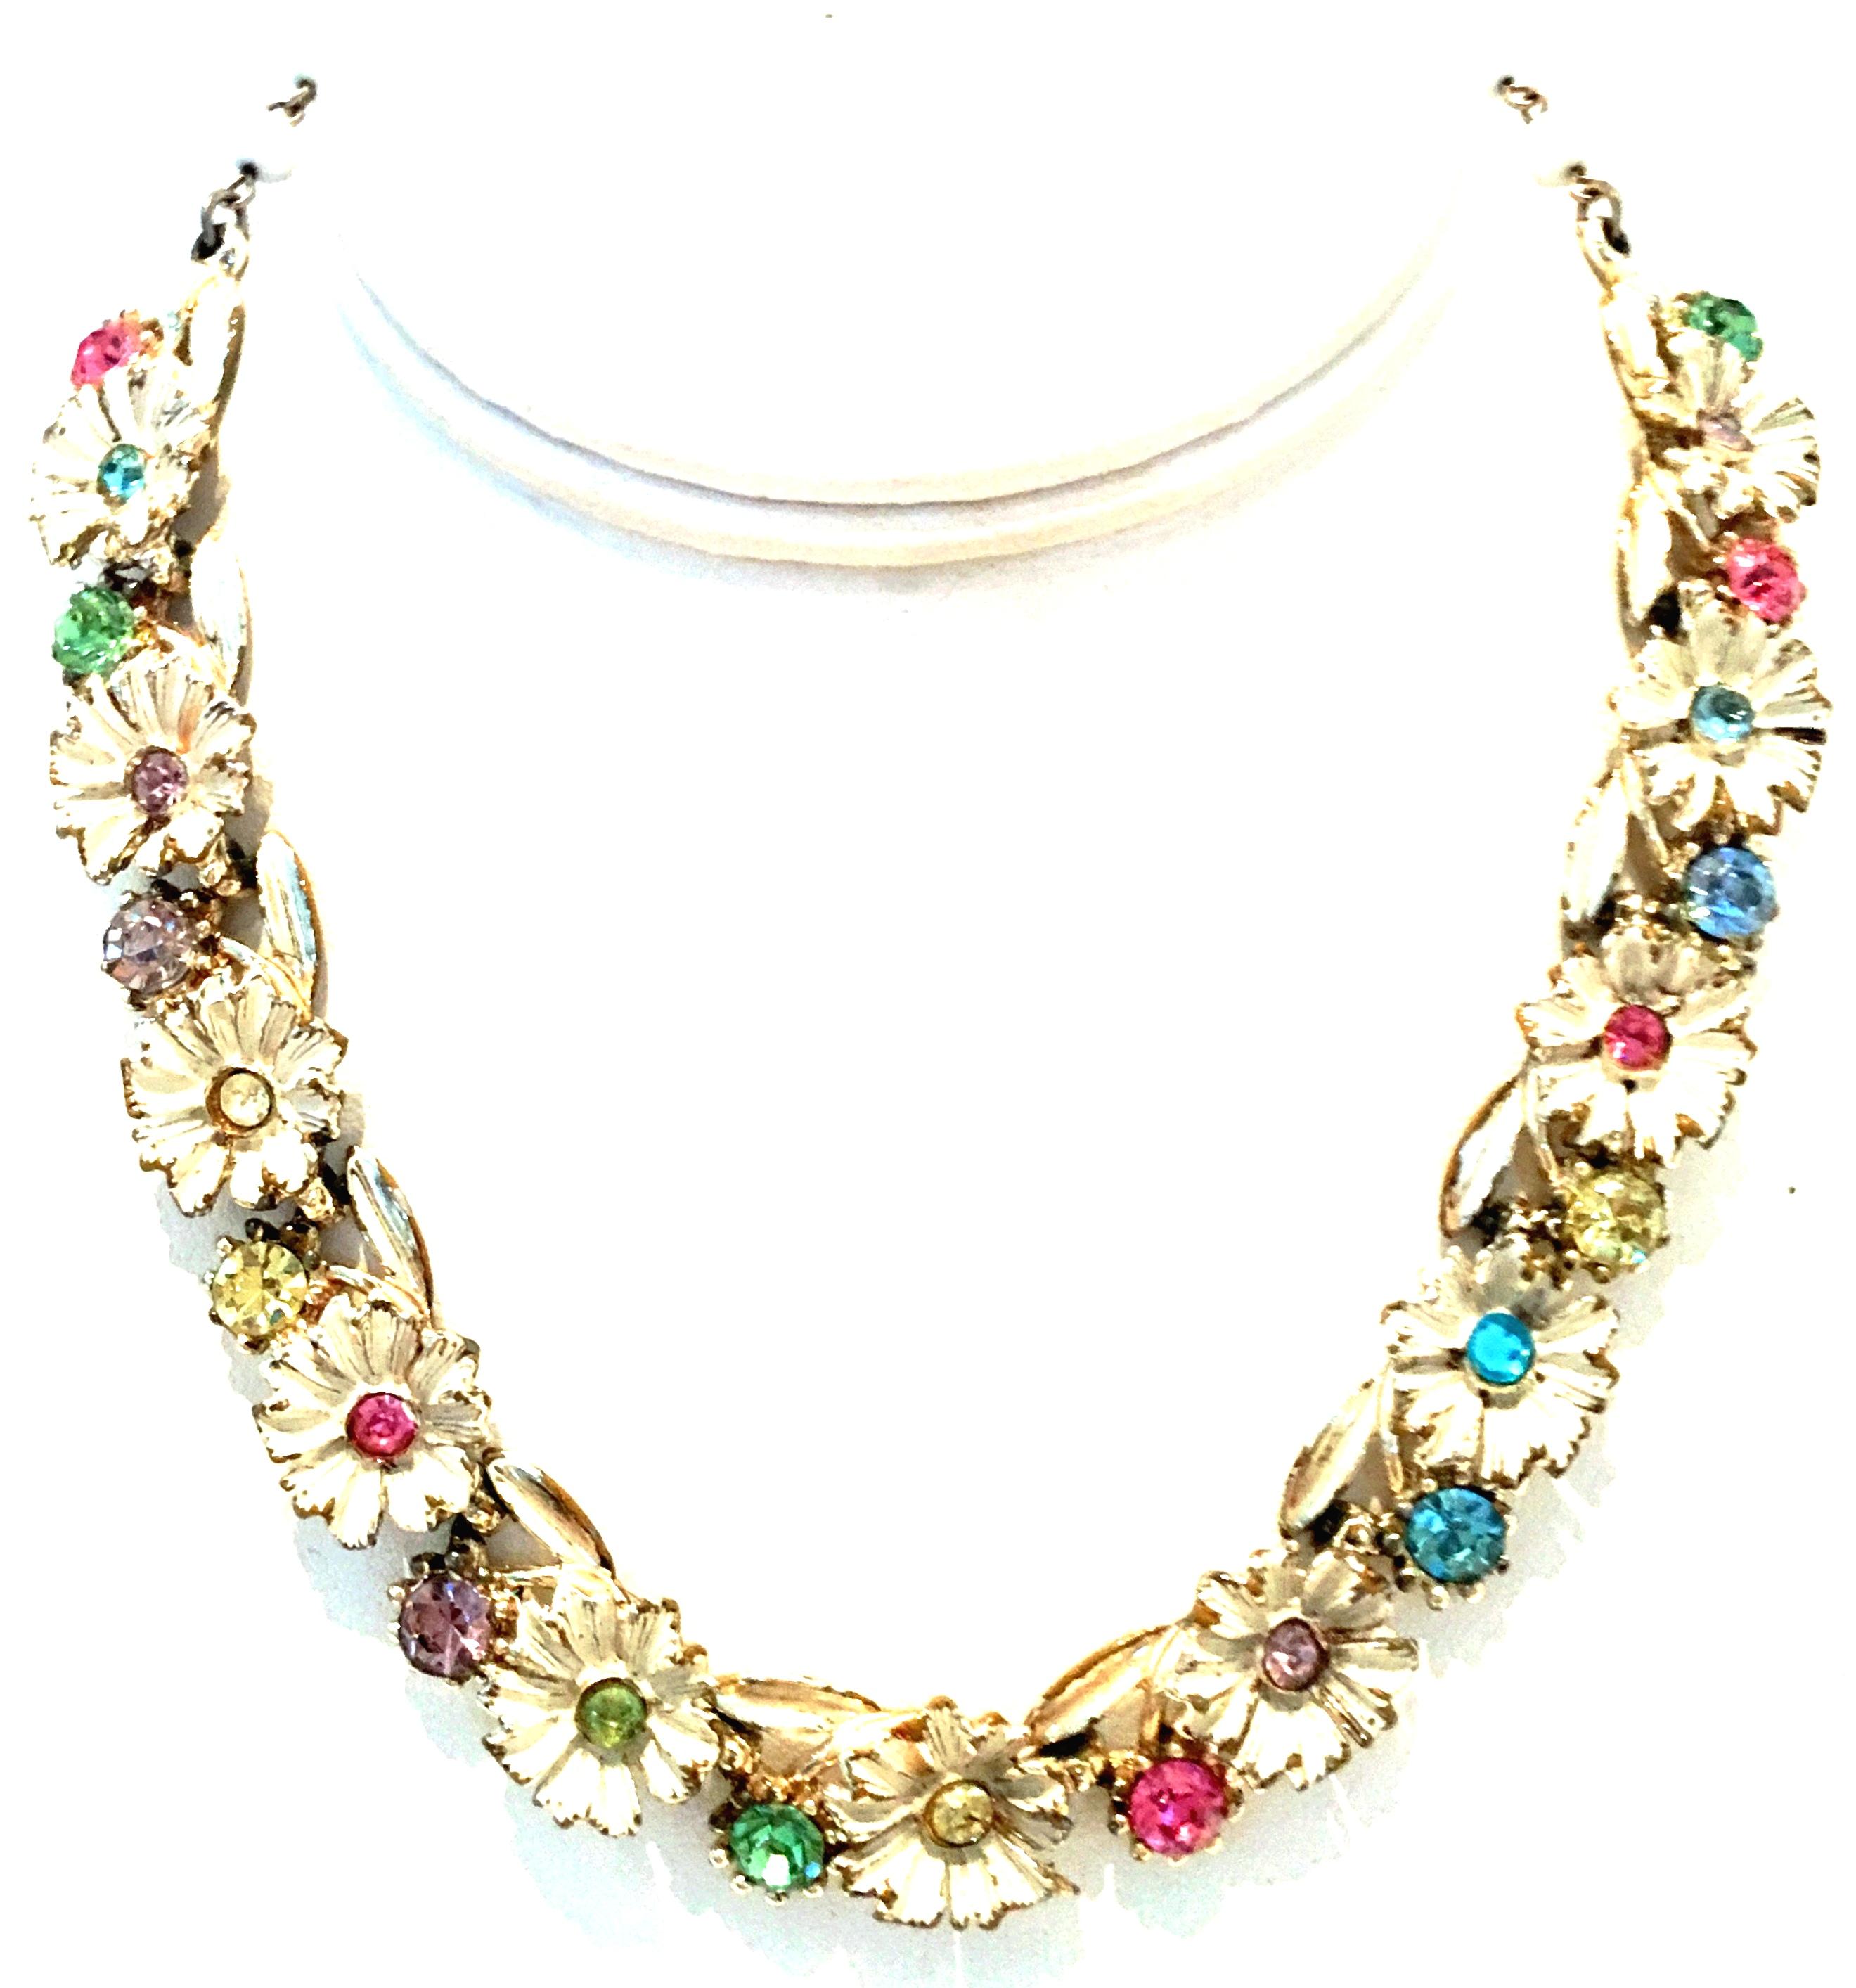 Mid-20th Century Gold, Enamel & Austrian Crystal Flower Link Choker Style Necklace And Earrings in the style of Trifari.-Set of Three Pieces. This coveted three piece set features gold plate metal with white enamel dimensional flowers and crystal